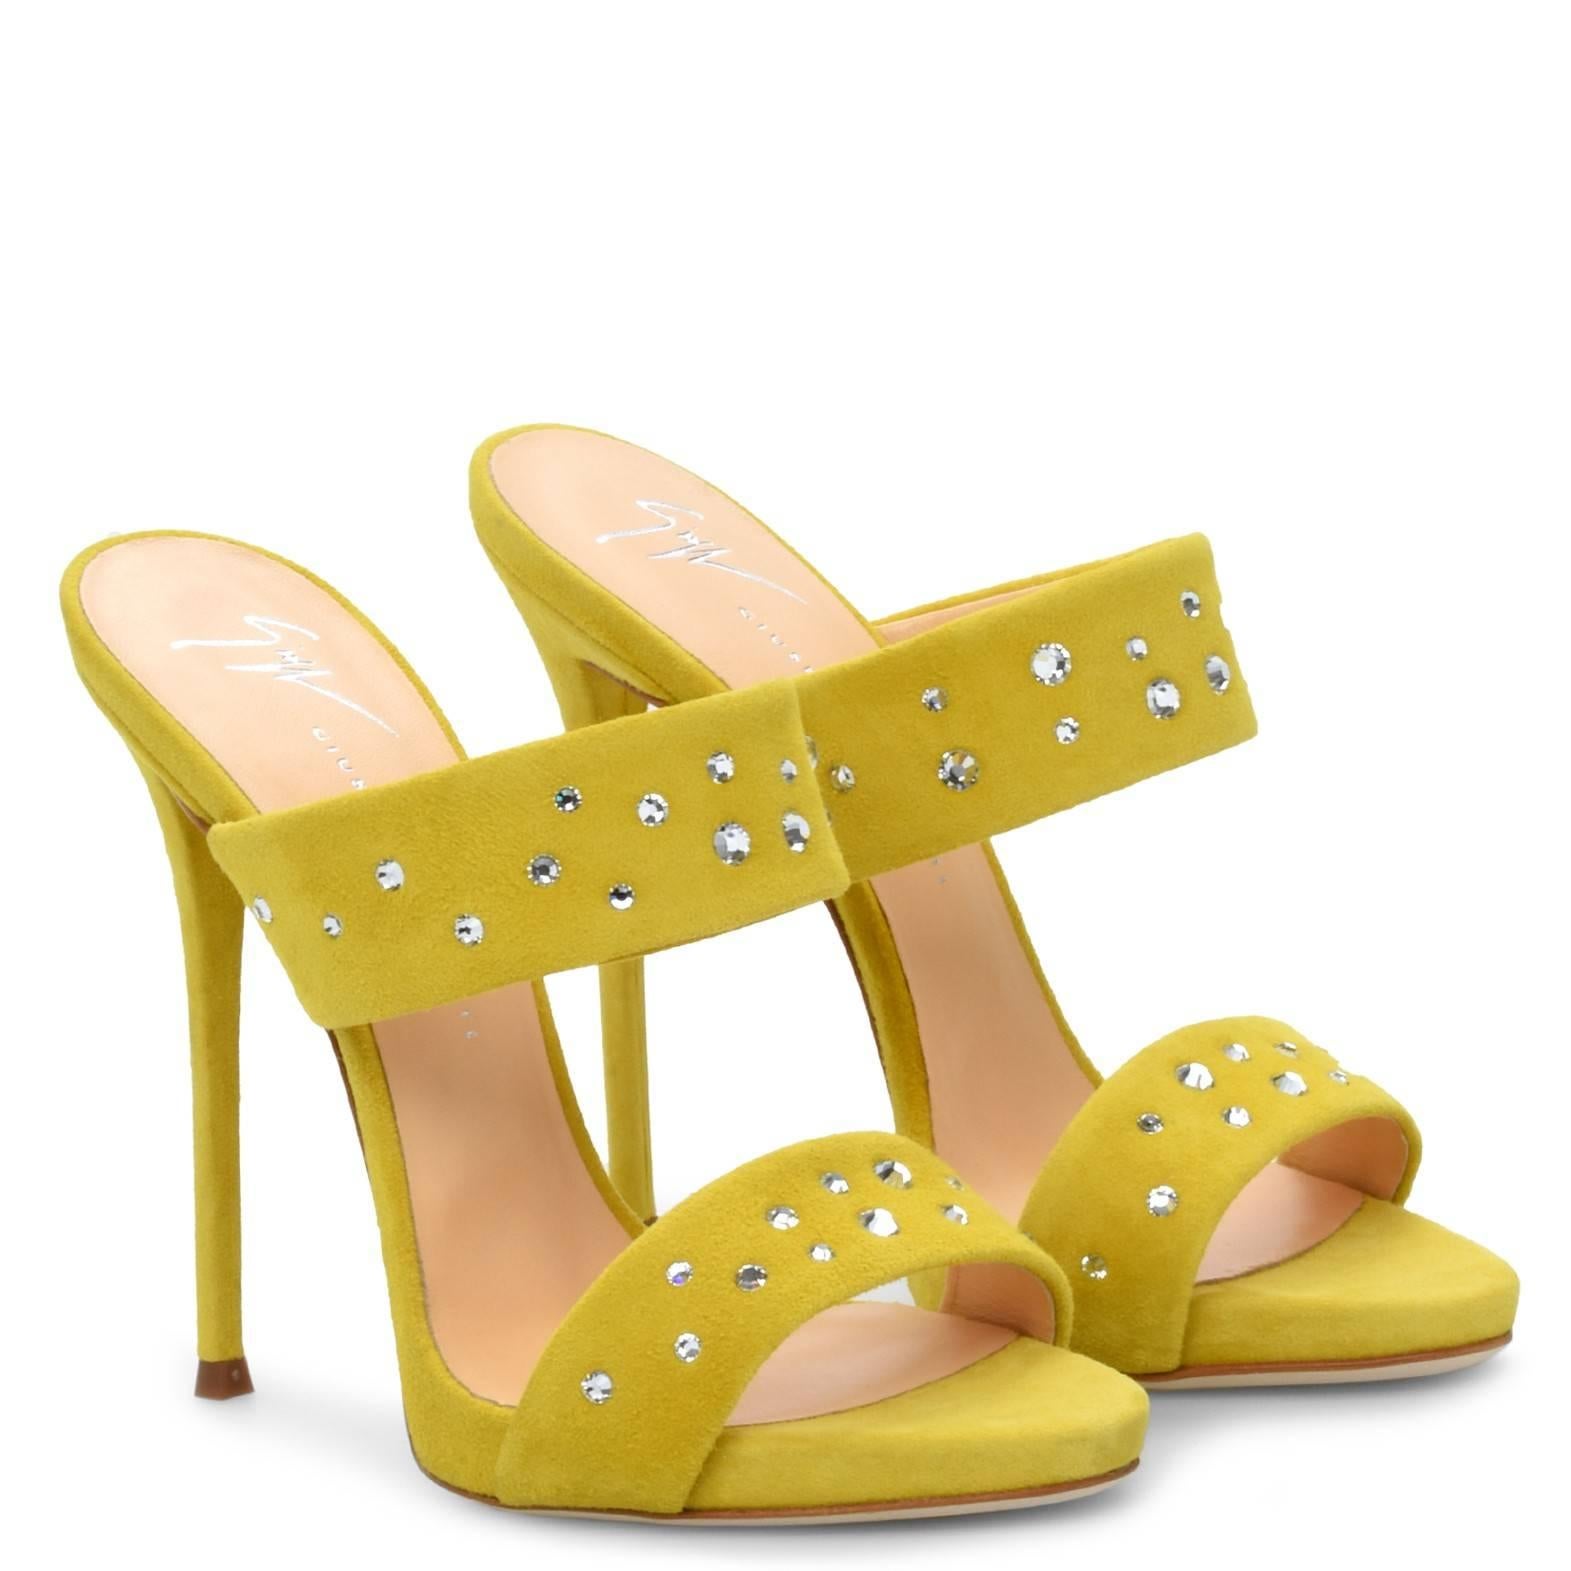 Giuseppe Zanotti NEW Yellow Suede Crystal Slidein Mules Heels Sandals in Box

Size IT 36
Suede
Crystal
Slide in
Made in Italy
Heel height 4.75